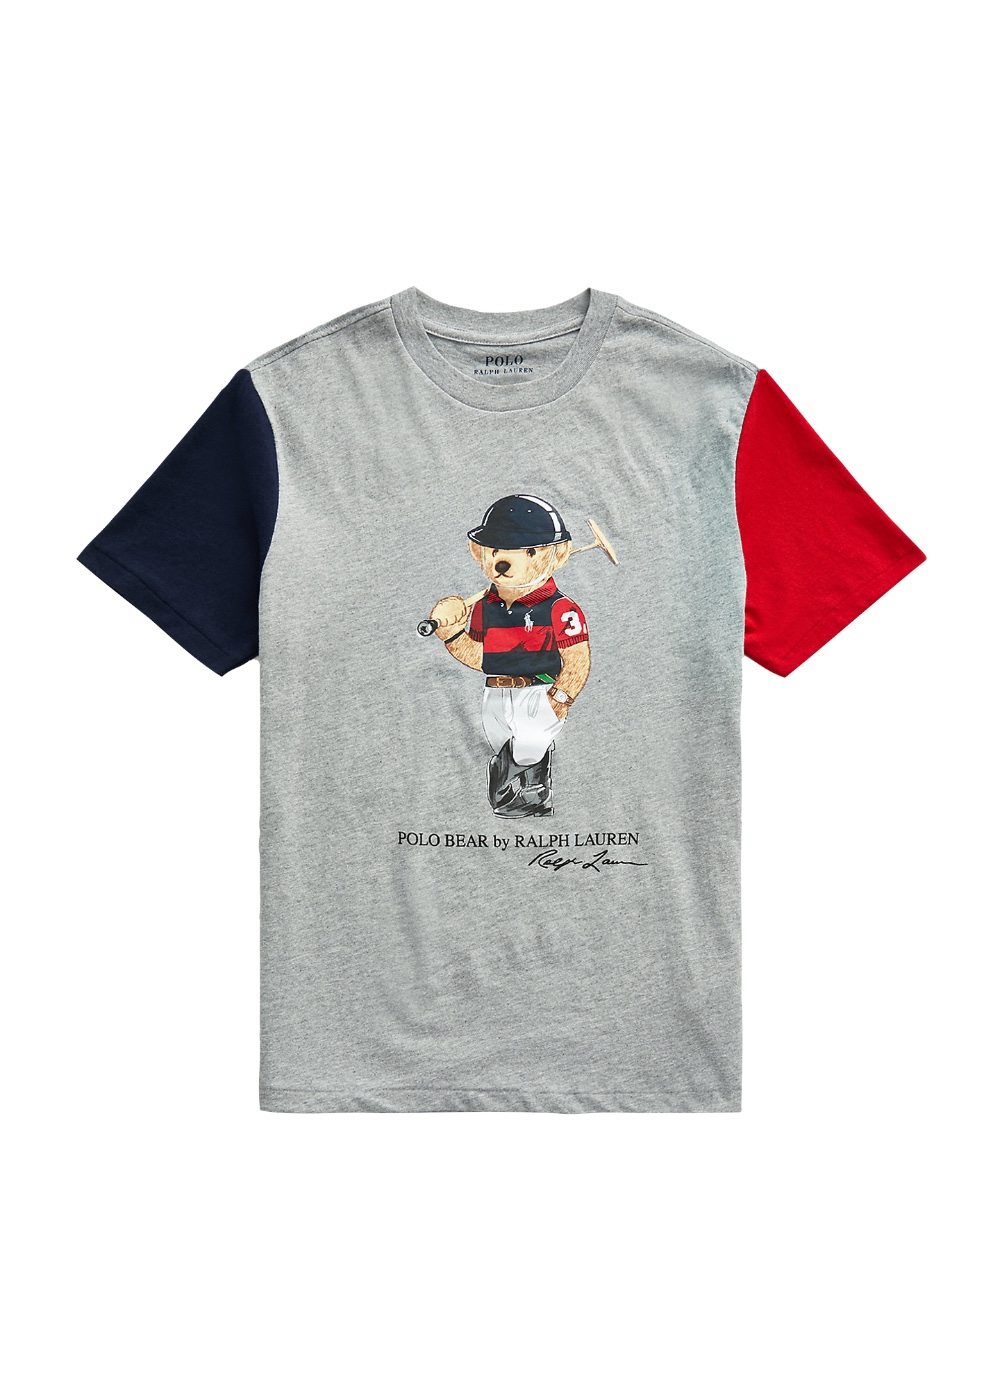 Featured image for “POLO RALPH LAUREN POLO BEAR”